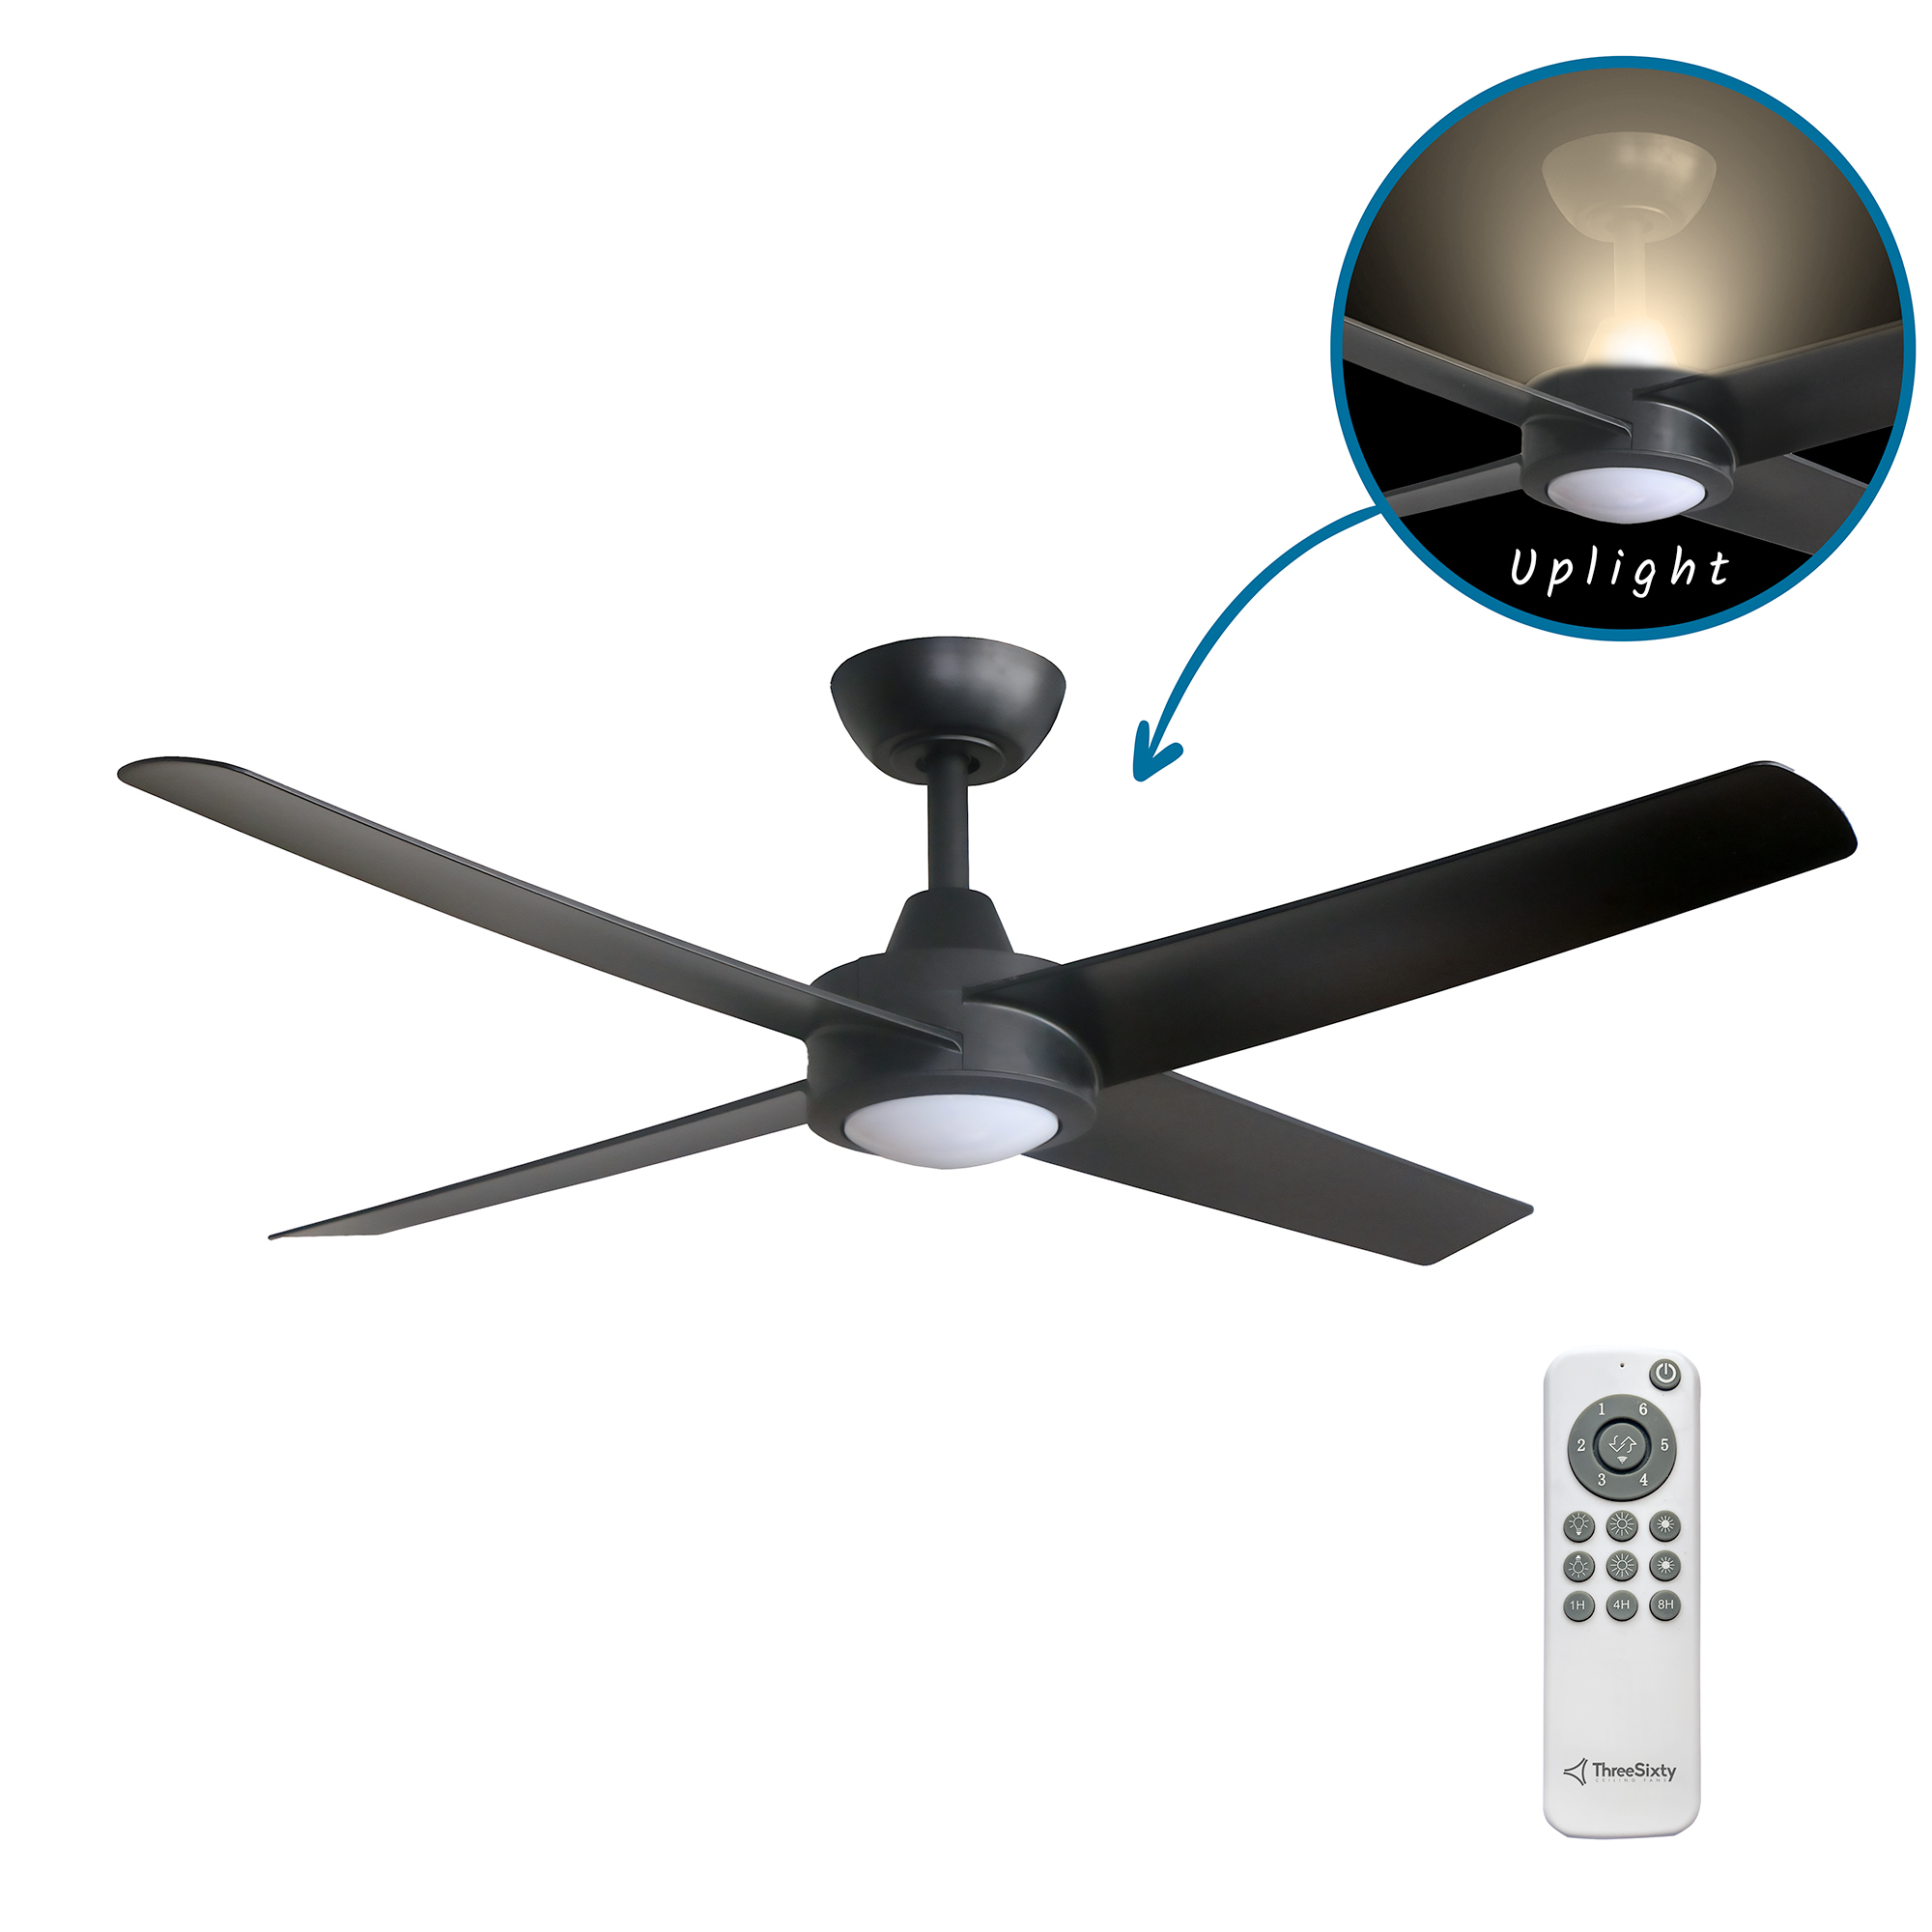 48" Ambience DC Ceiling Fan in Black with 17W LED Downlight and Built-in Uplight